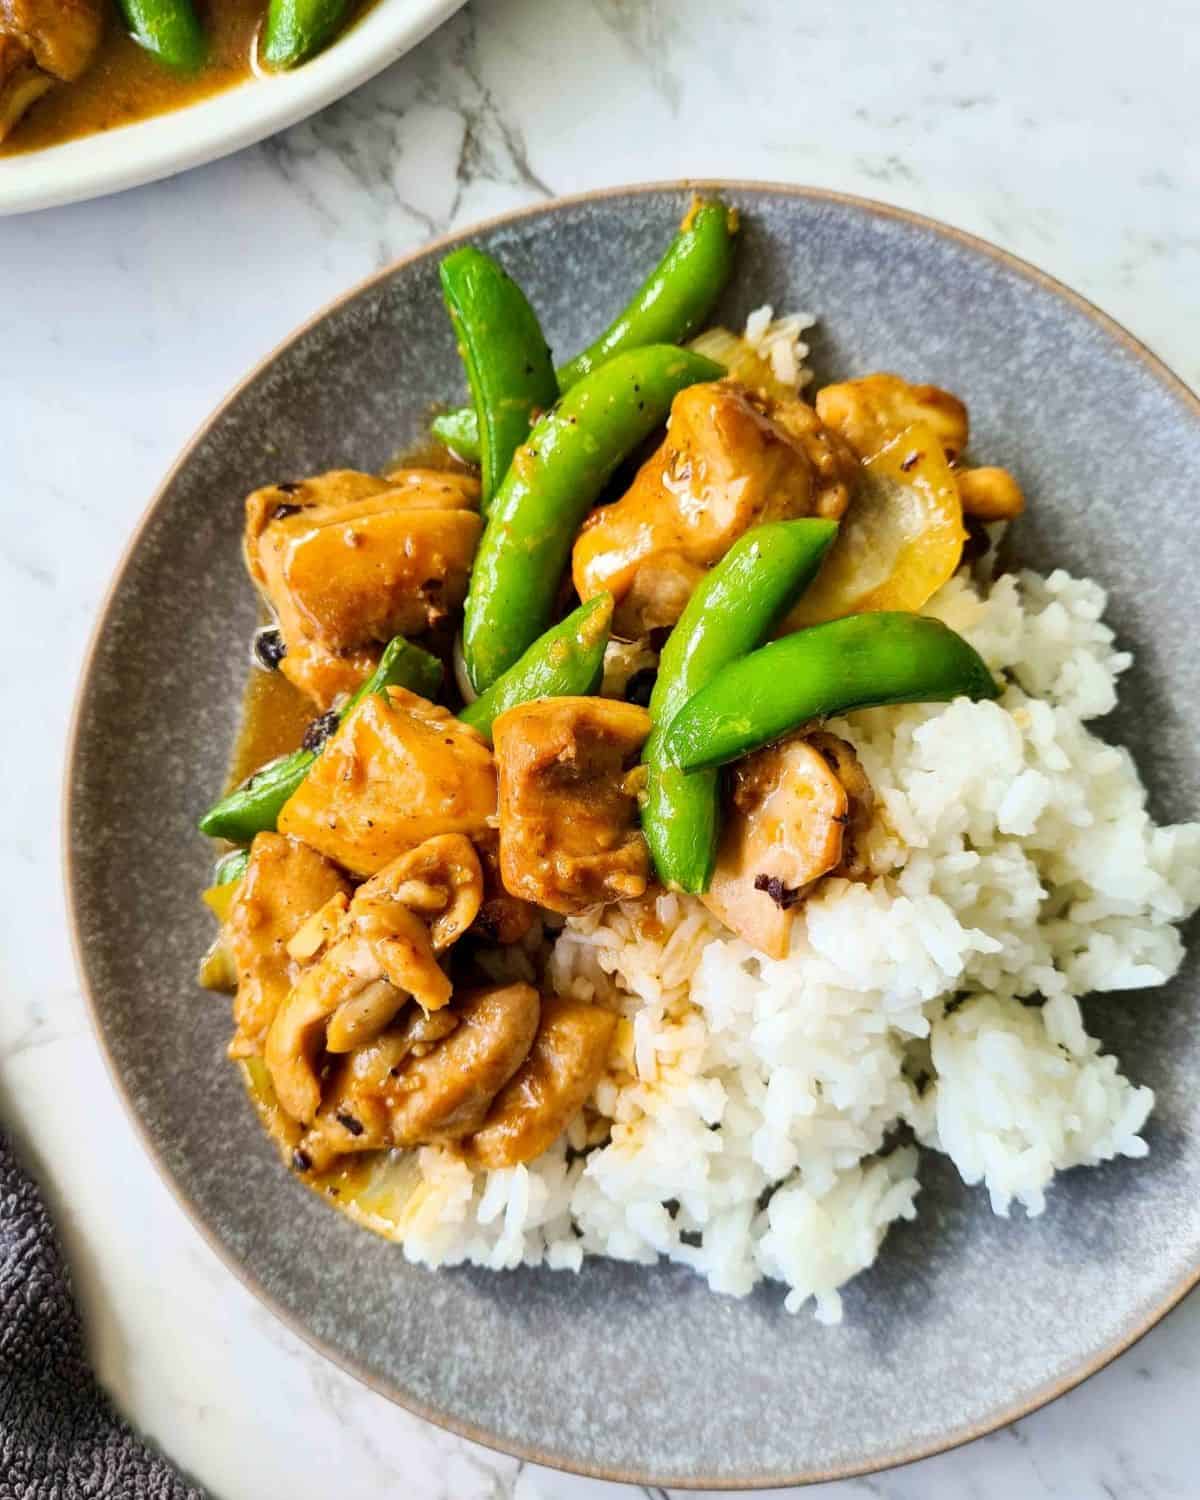 Chicken and snow peas stir fry served with rice on a plate